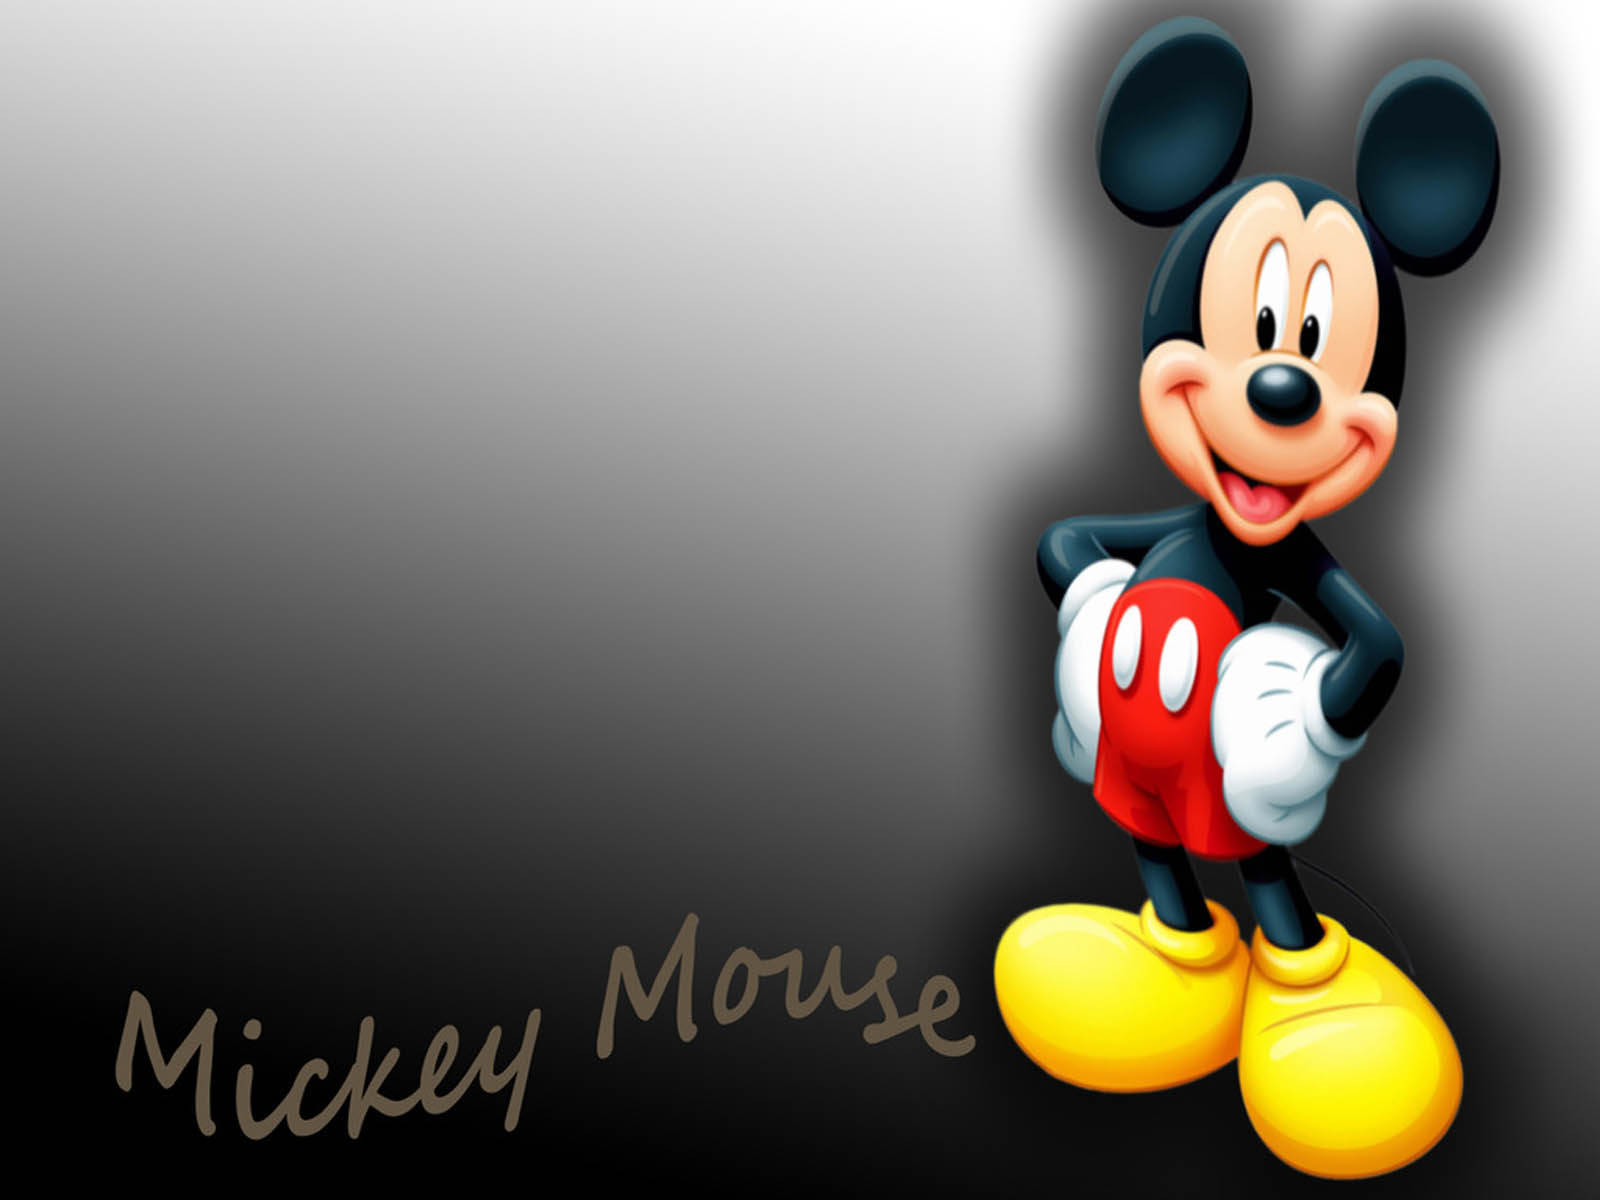 Wallpapers HQ Free Images Download Desktop Wallpapers Mickey Mouse